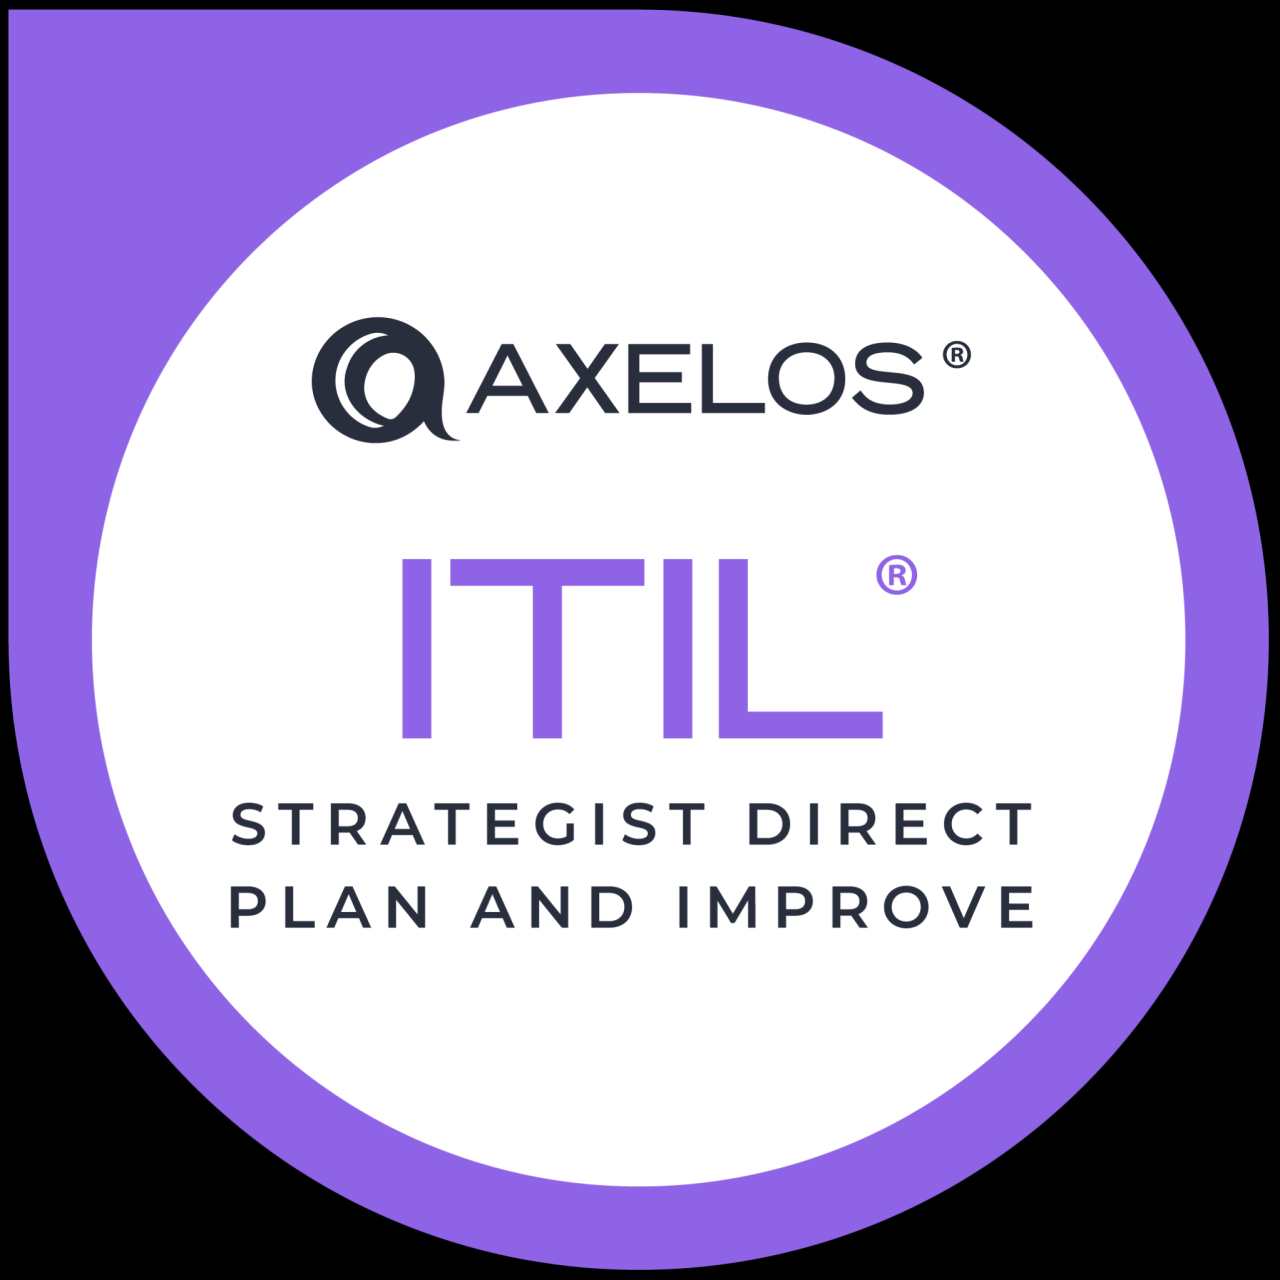 Itil 4 ® Strategist Direct, Plan And Improve - Credly